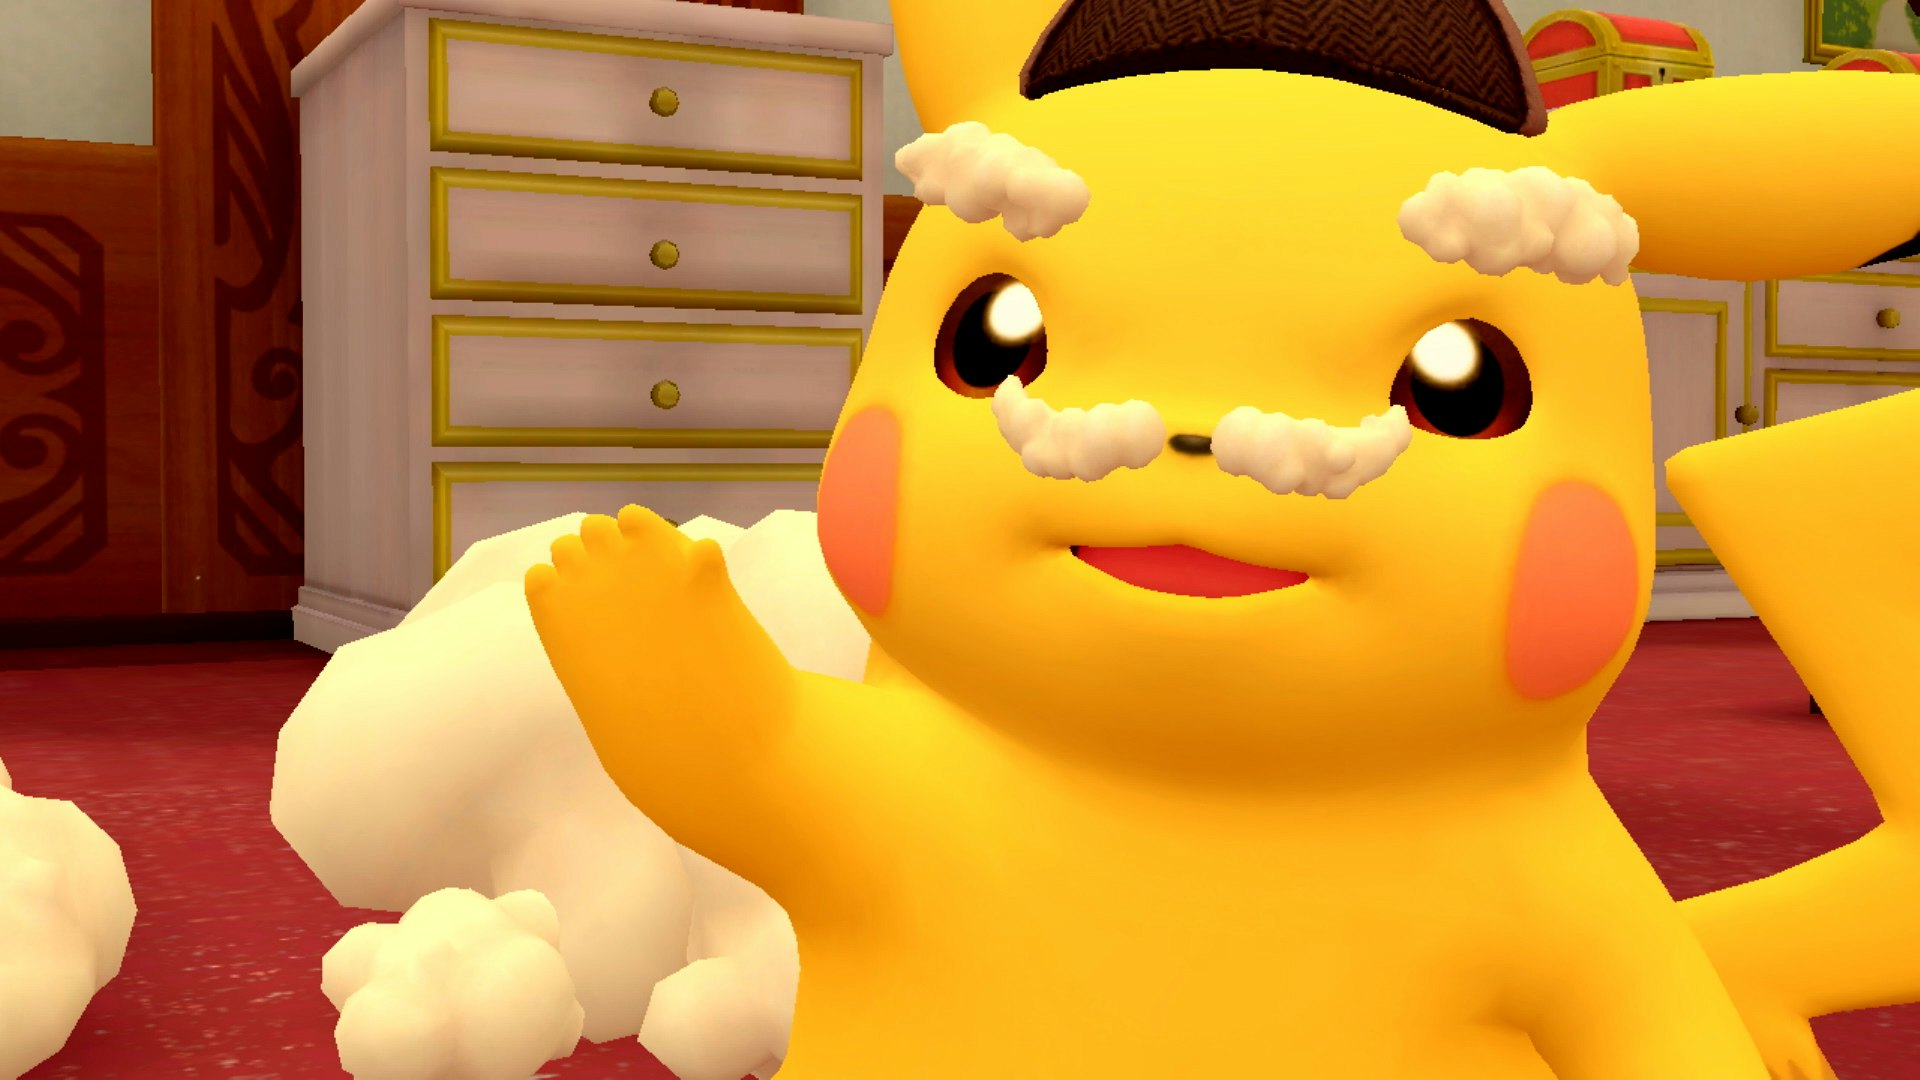 Pokémon: Detective Pikachu review: New movie is little more than an excuse  to show off colorful creatures.